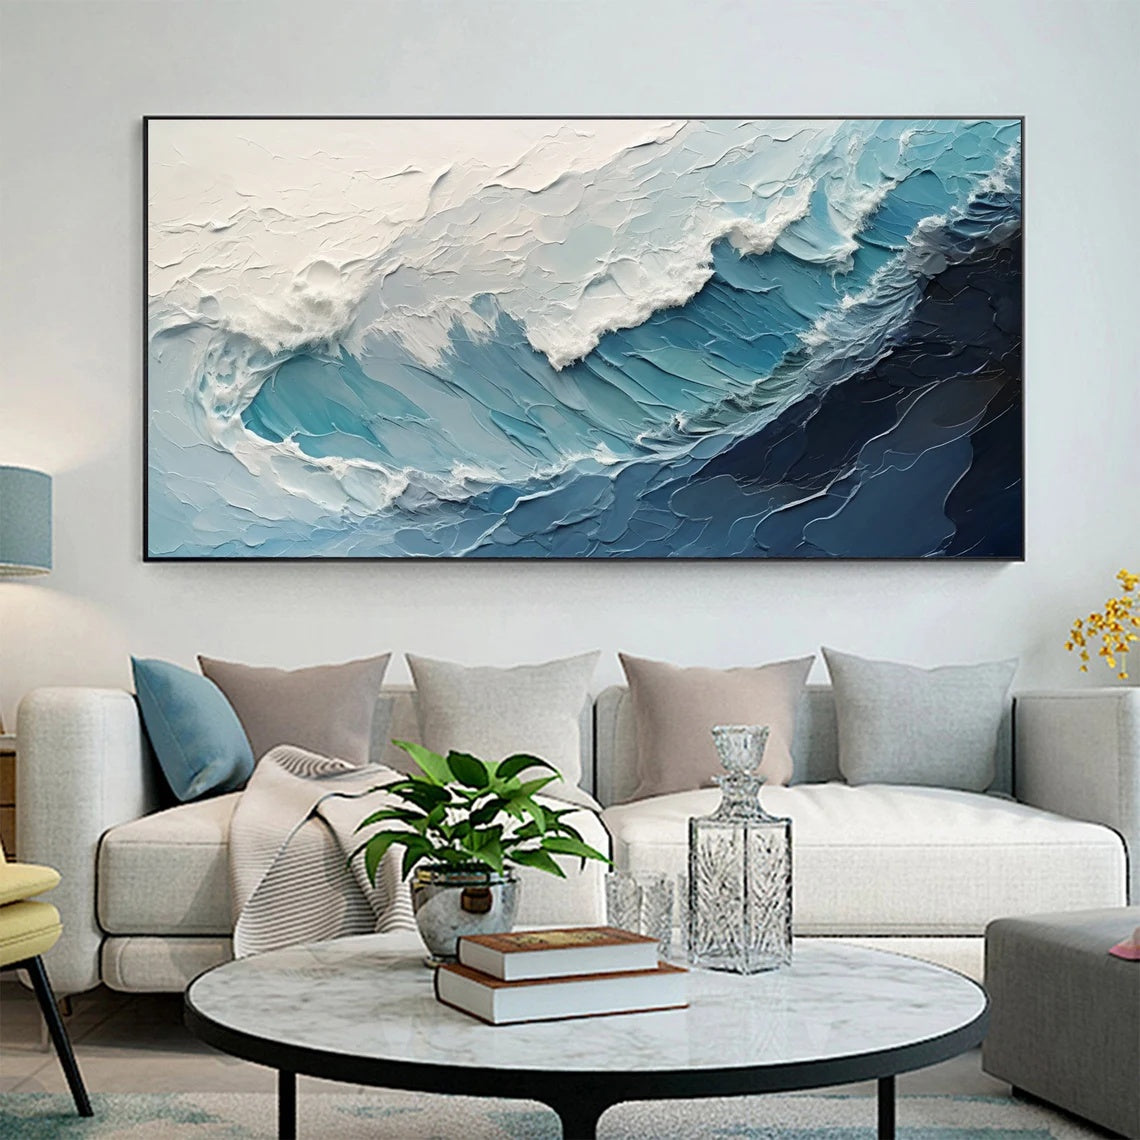 Captivating Waves: A Customer's Tale of Artistic Adoration